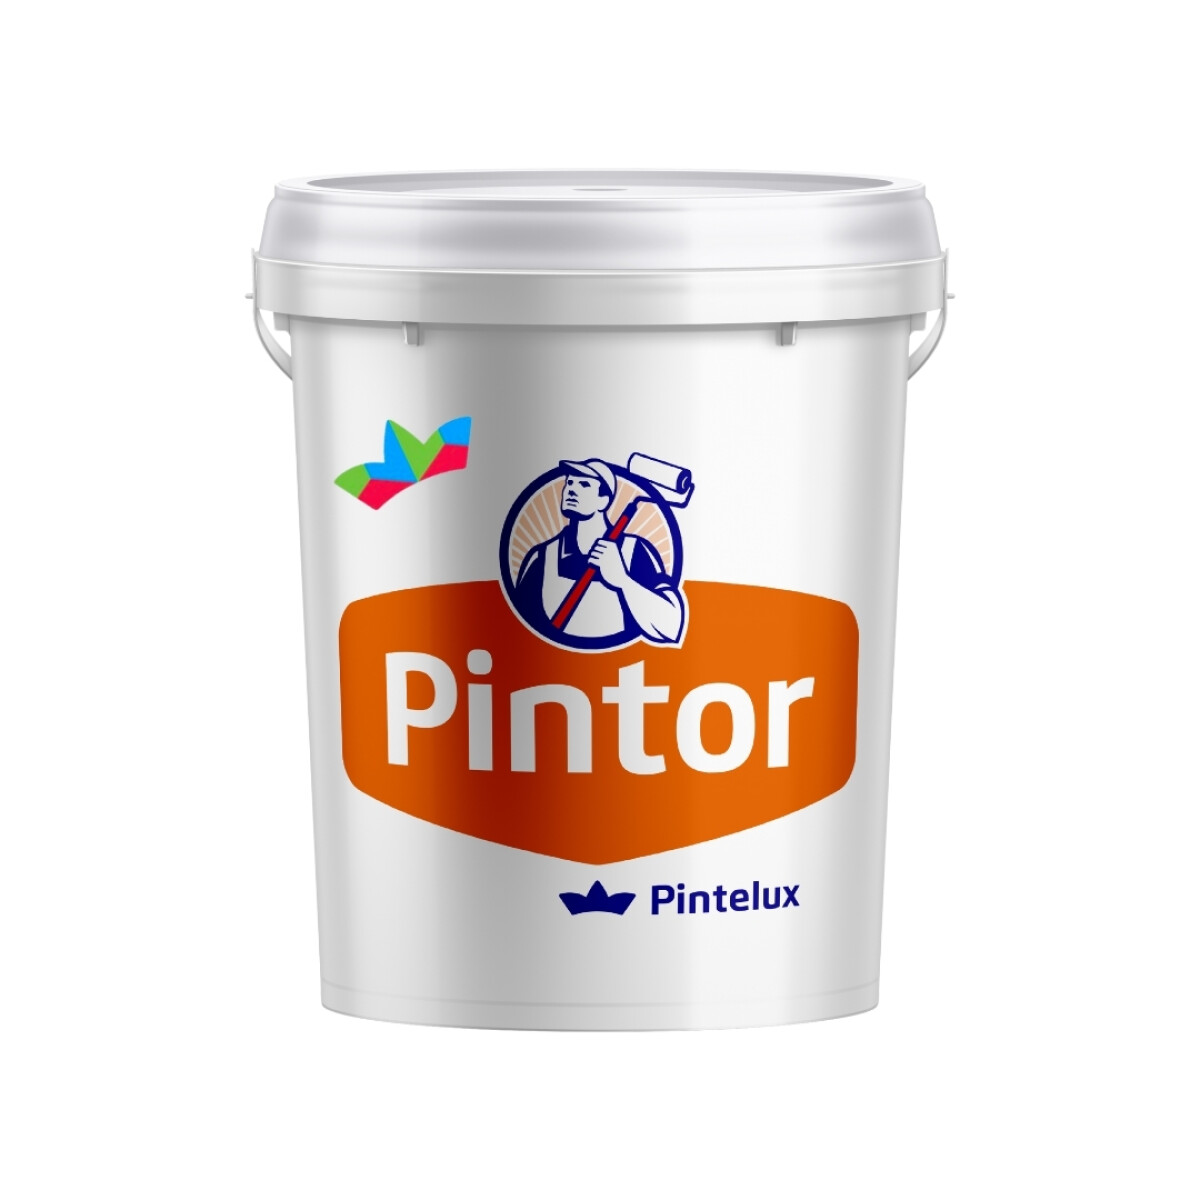 PINTOR MULTIPROPOSITO TEXAS - 1LT 